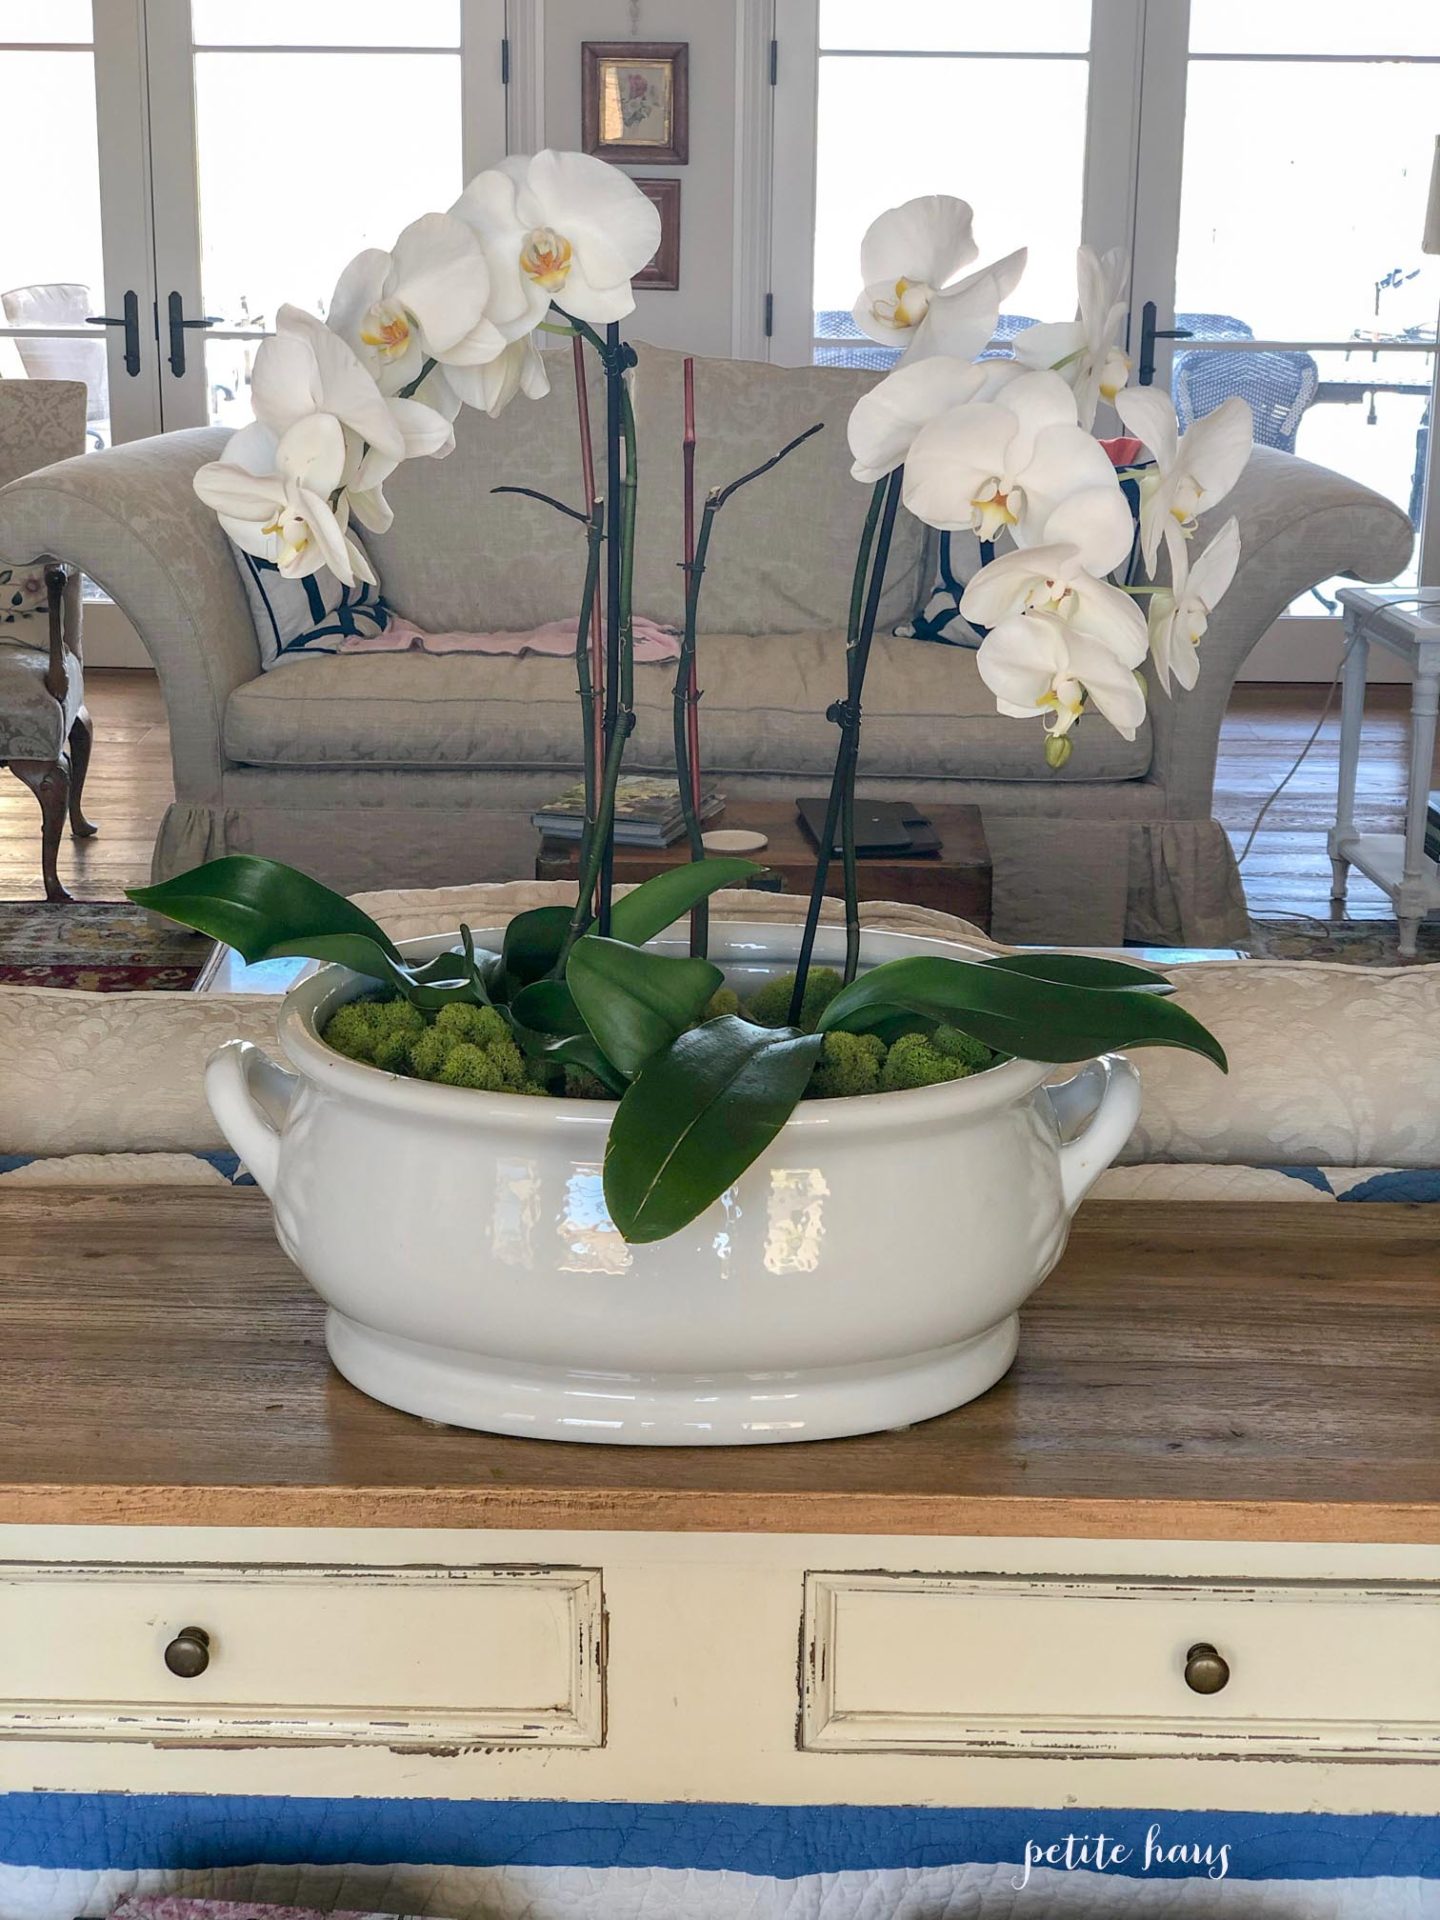 DIY orchid centerpiece in white ironstone bowl